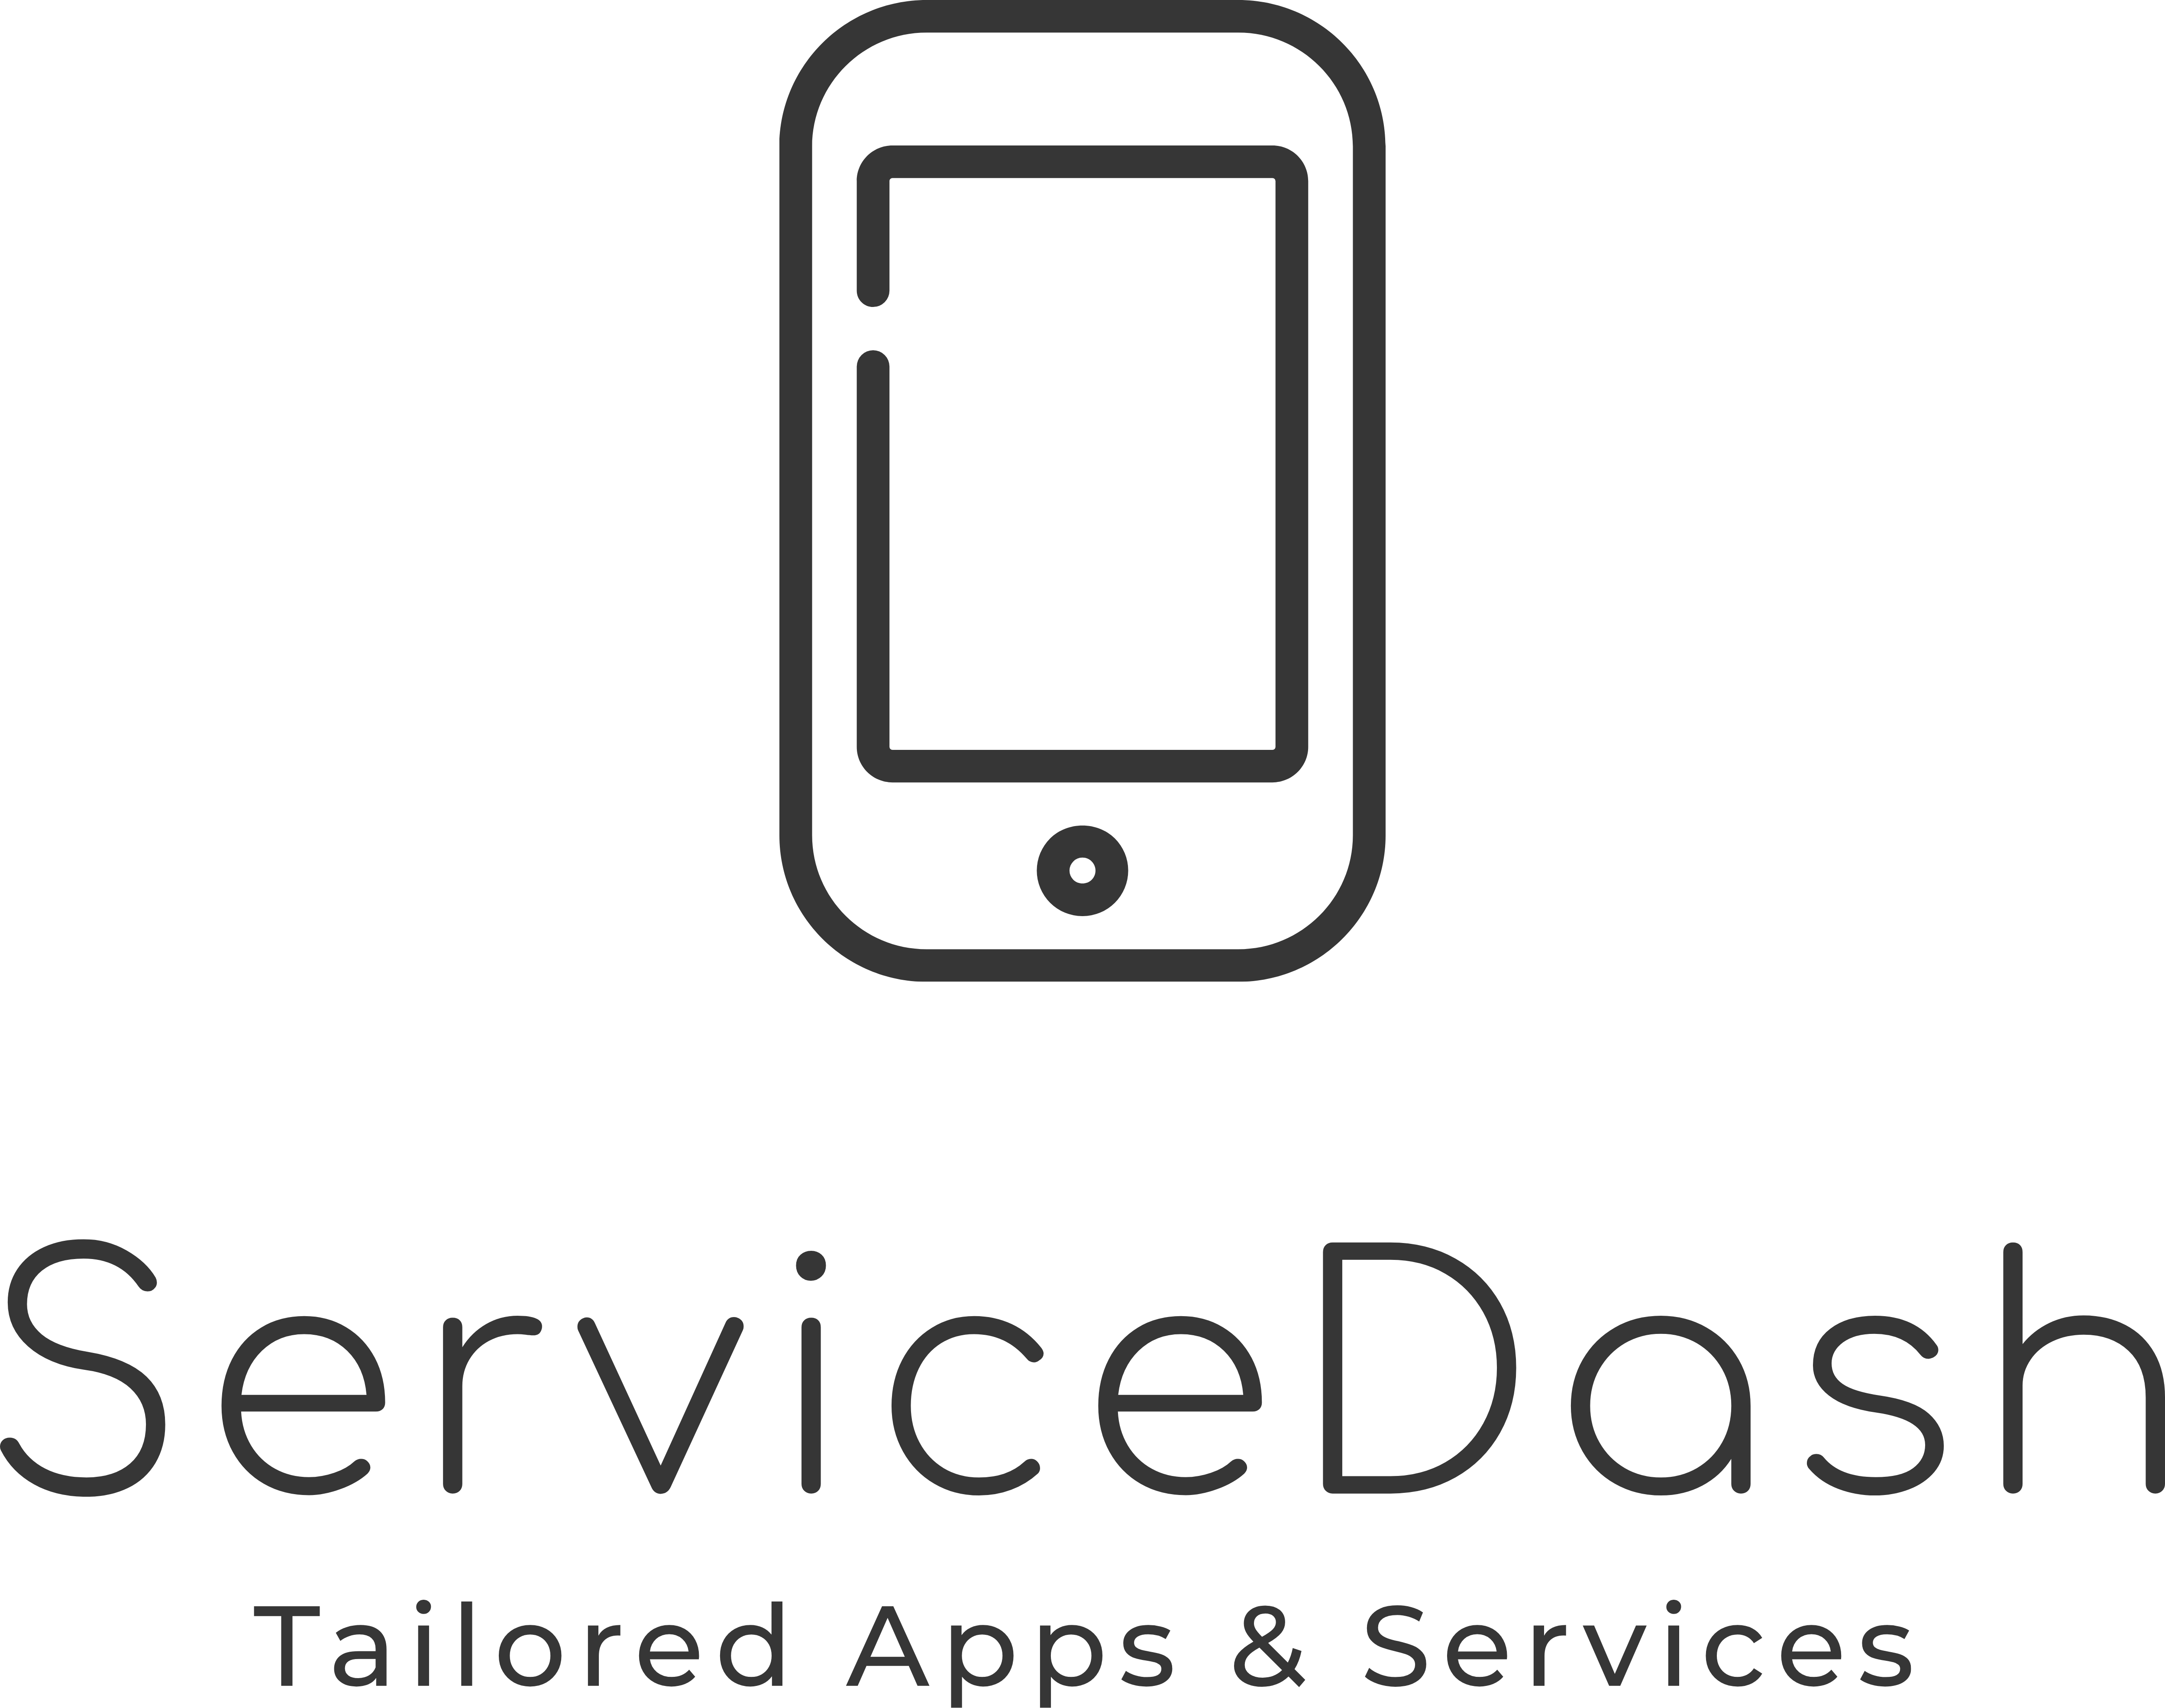 Tailored Apps & Services